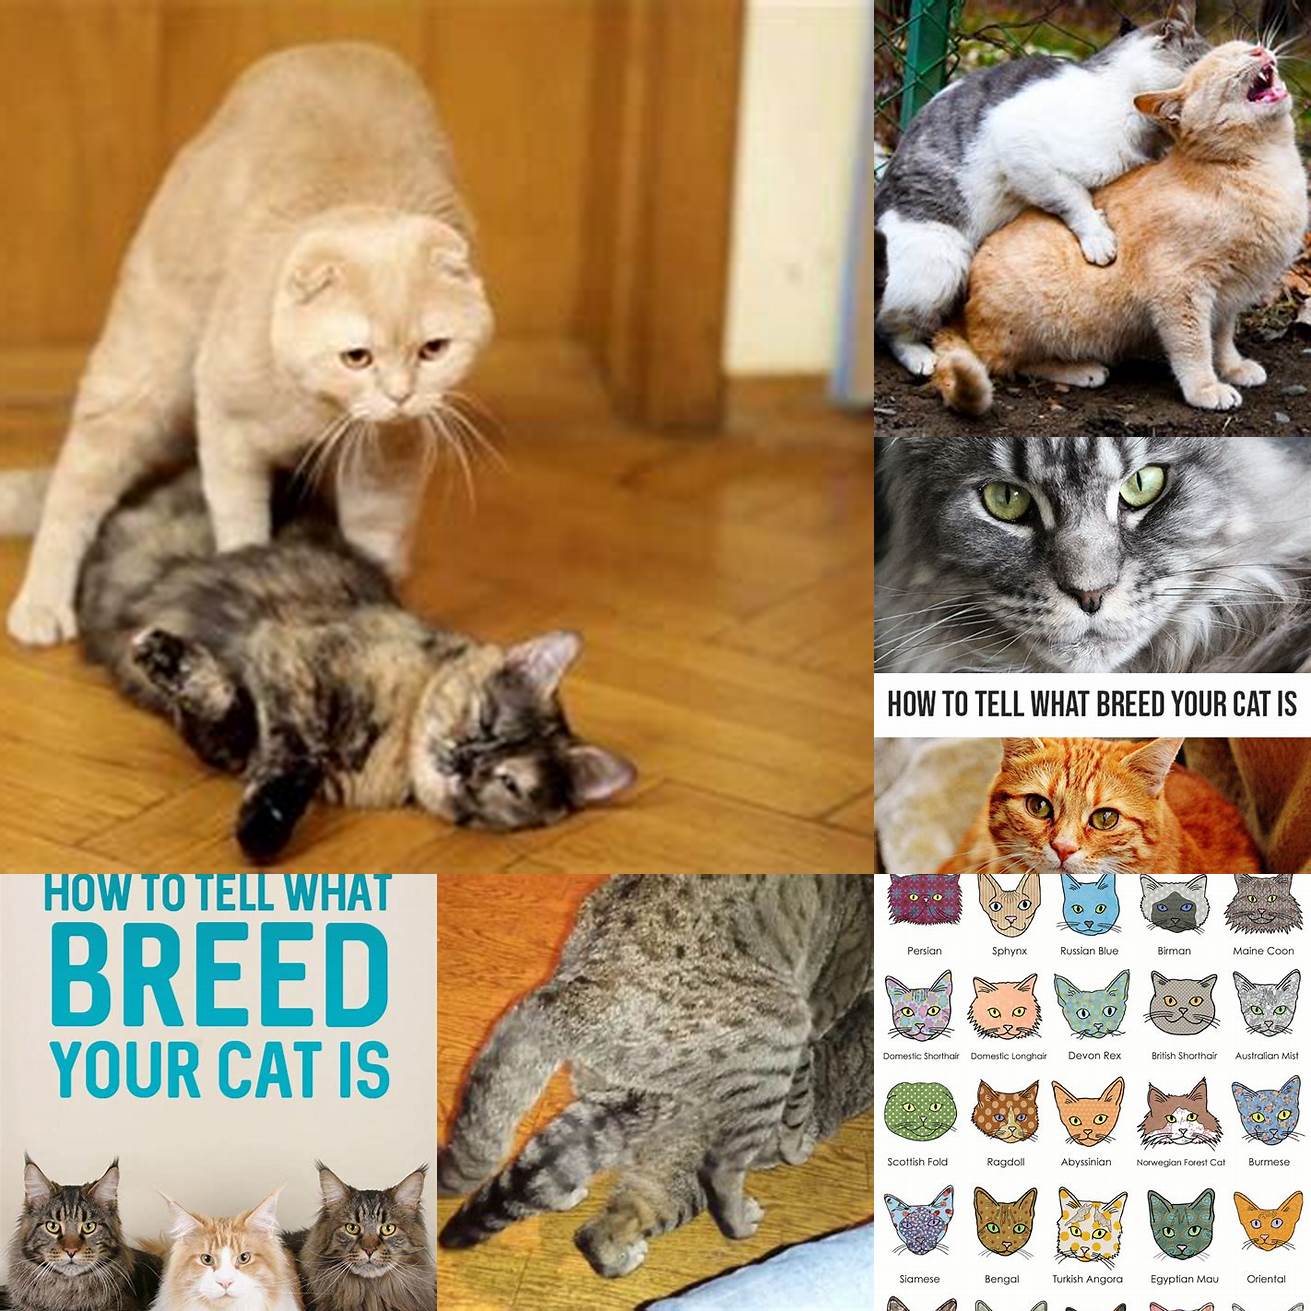 Breeding If you plan on breeding your cat knowing their breed is essential